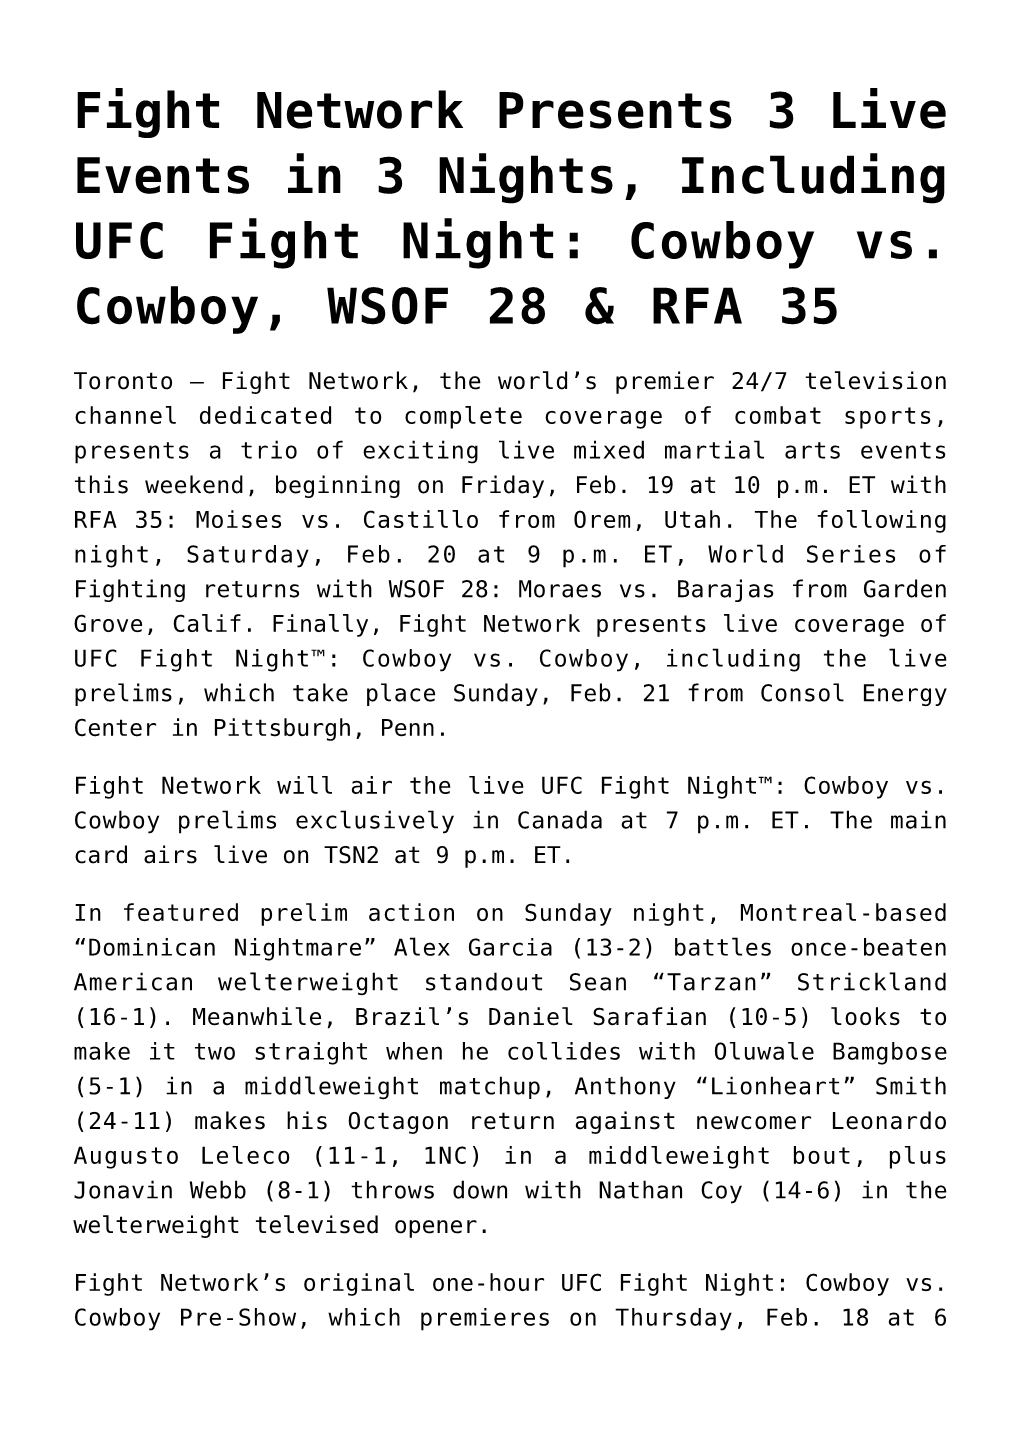 Fight Network Presents 3 Live Events in 3 Nights, Including UFC Fight Night: Cowboy Vs